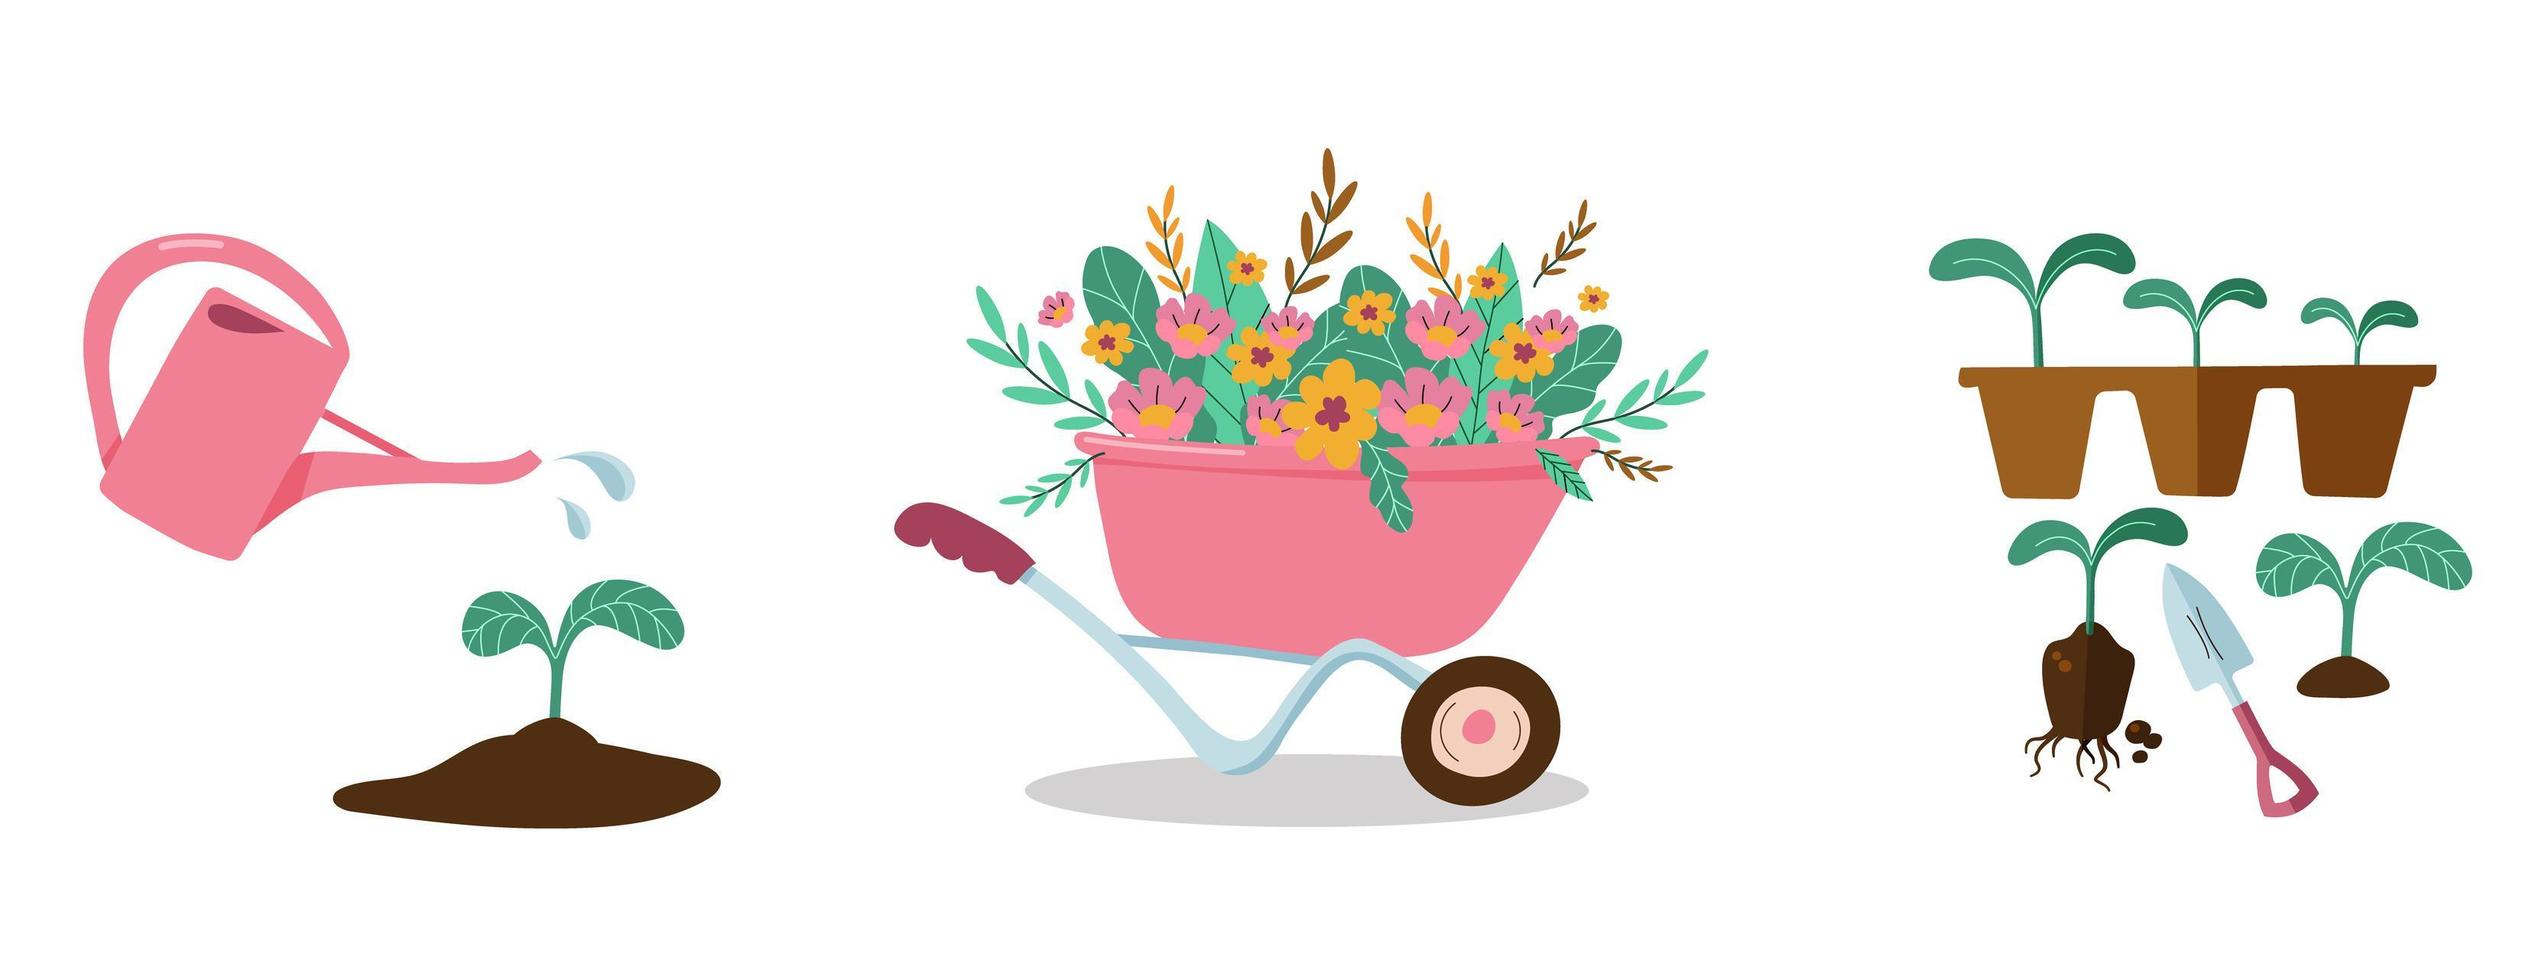 The concept of gardening tools and gardening equipment. Vector illustration of items for gardening.